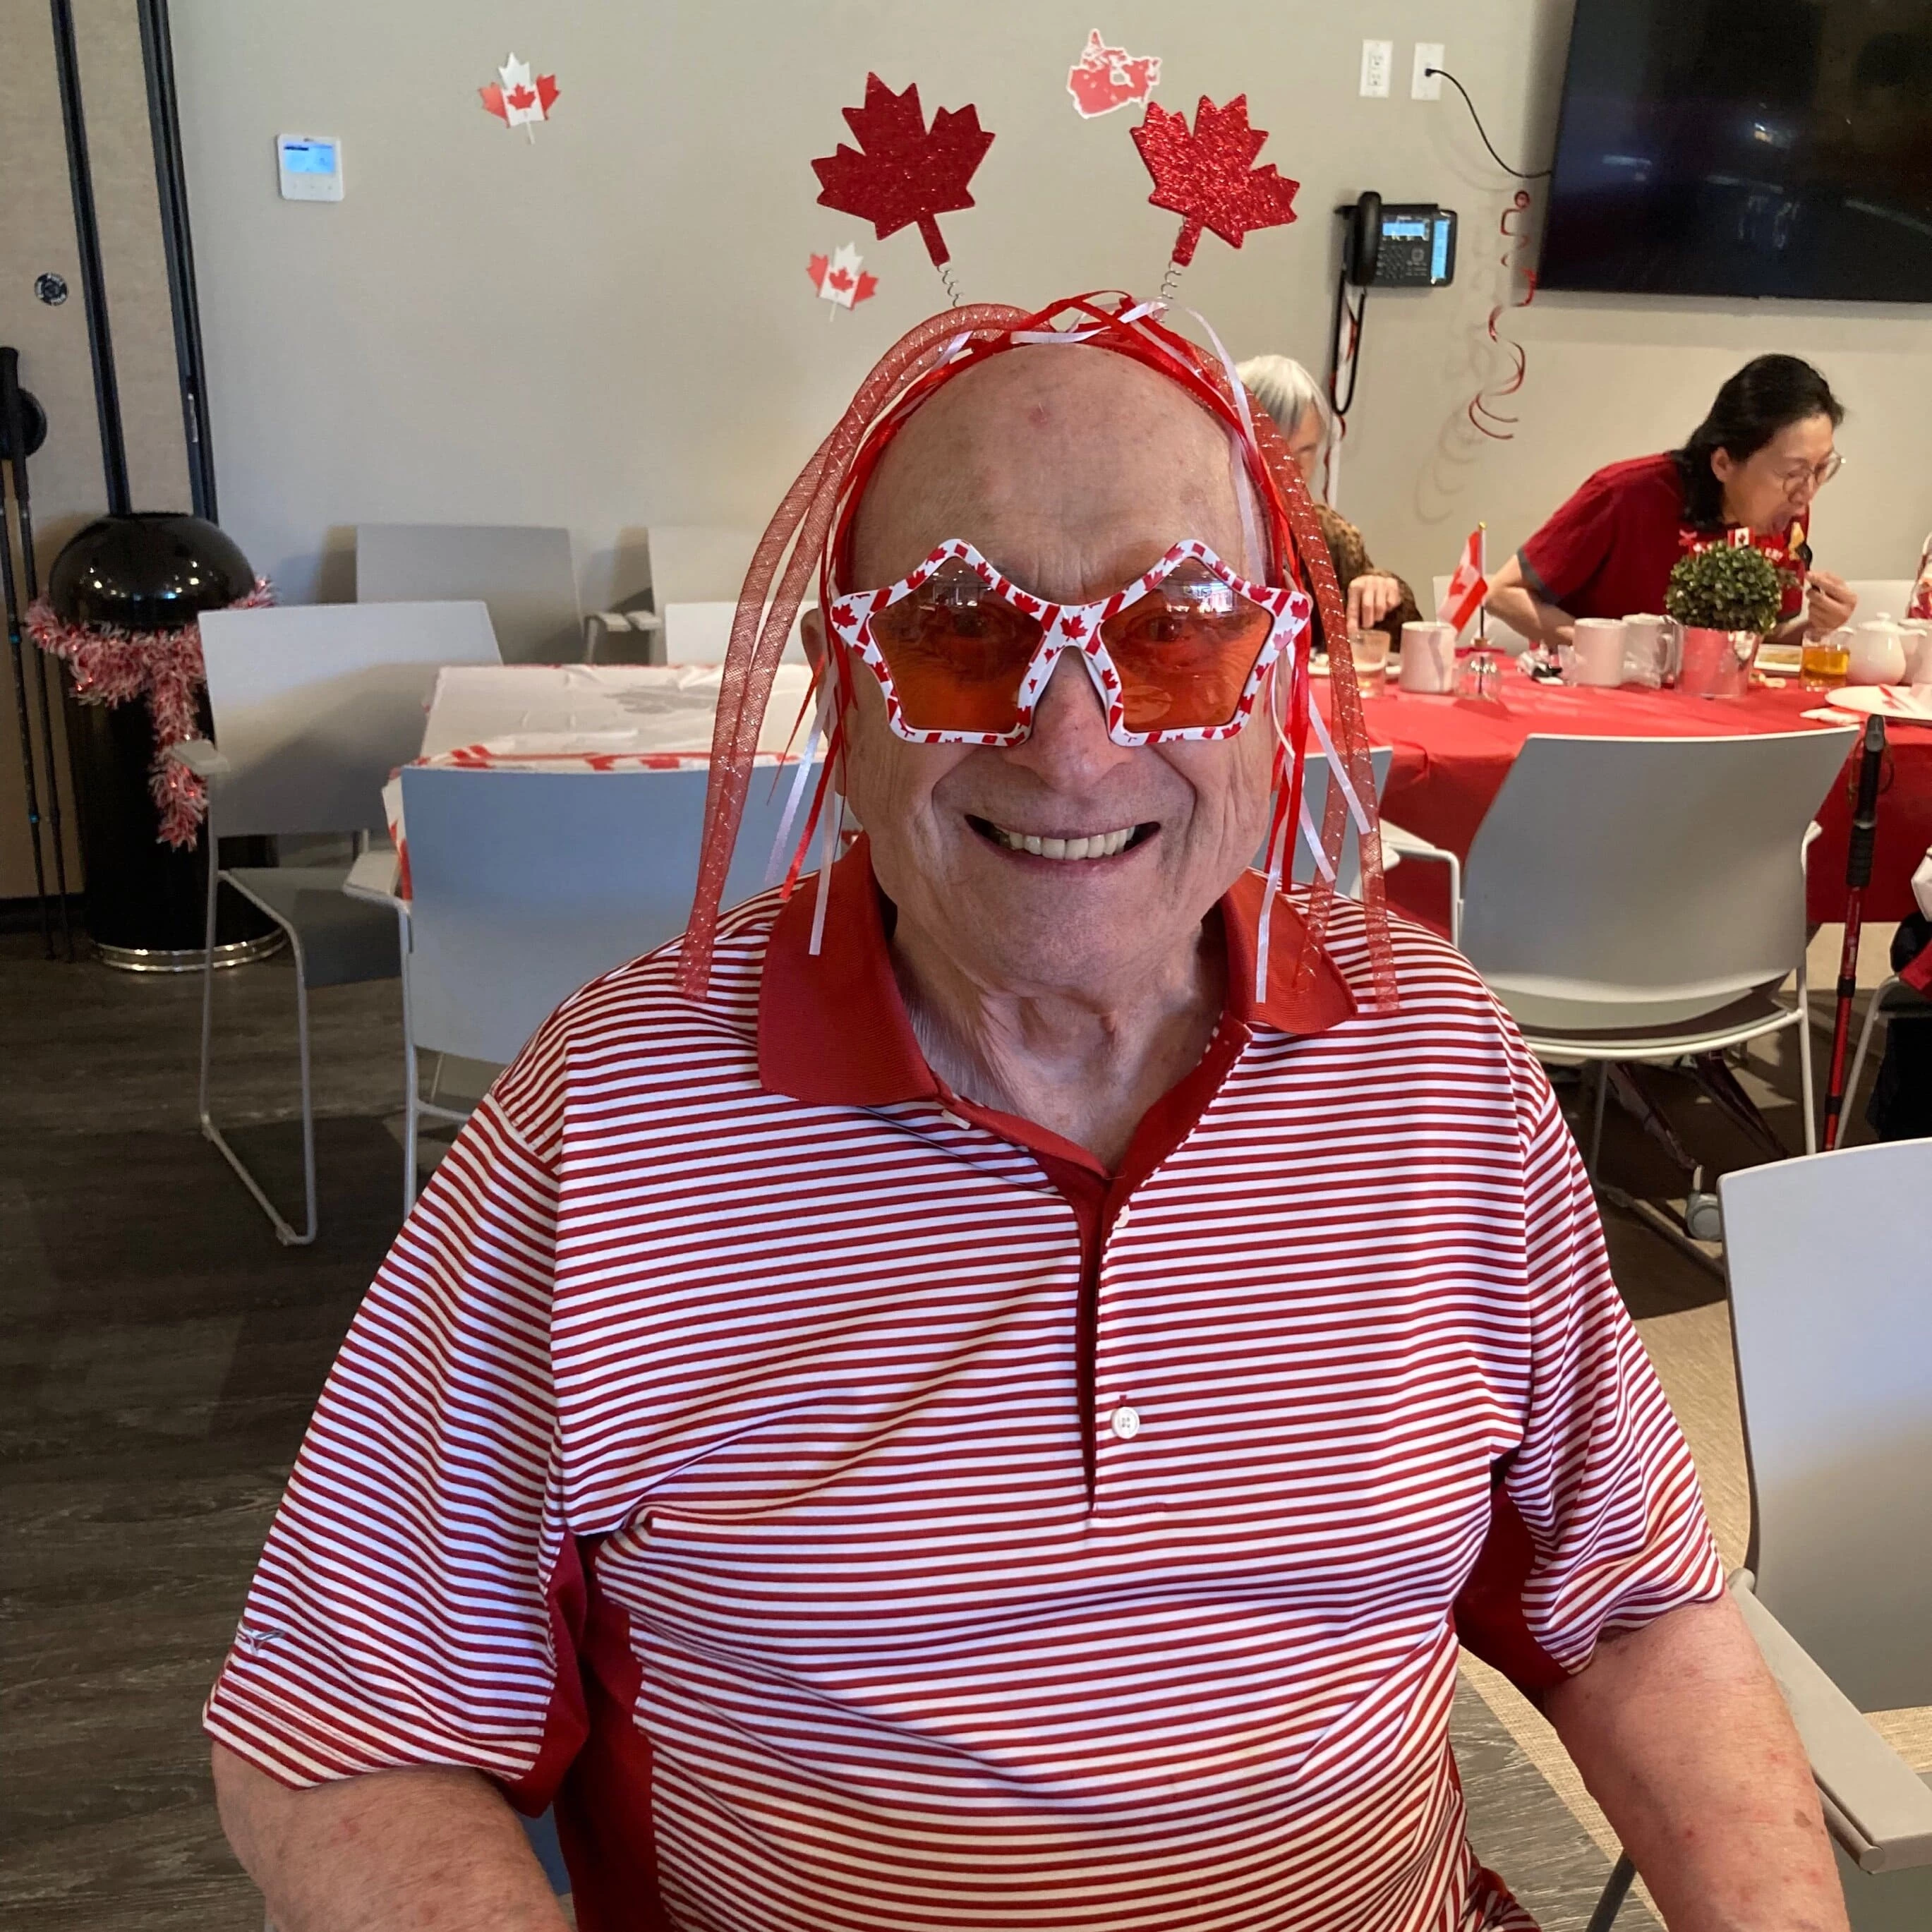 A senior man wearing red and white on Canada Day in his senior apartment residence